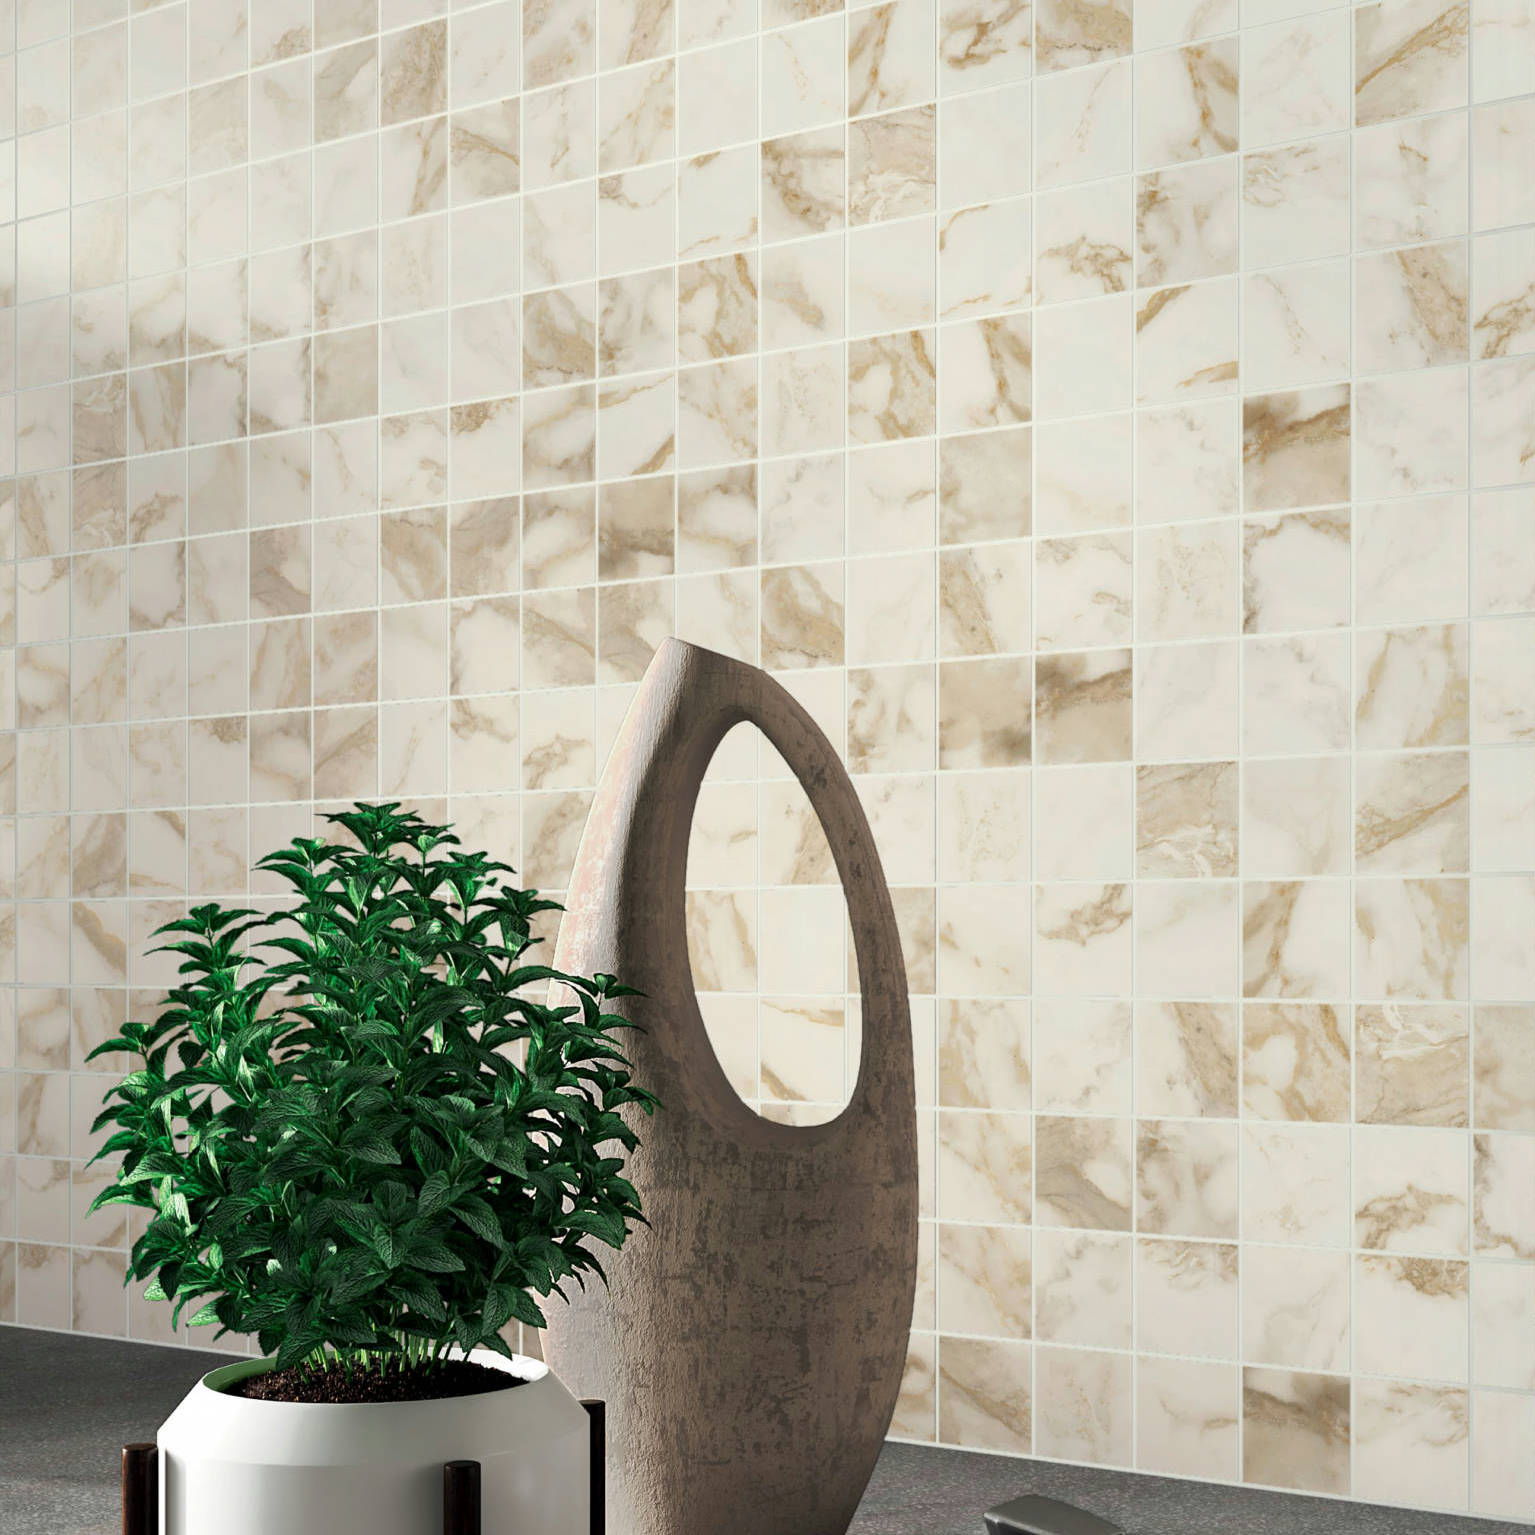 Prestige_16_G | Stones And More | Finest selection of Mosaics, Glass, Tile and Stone